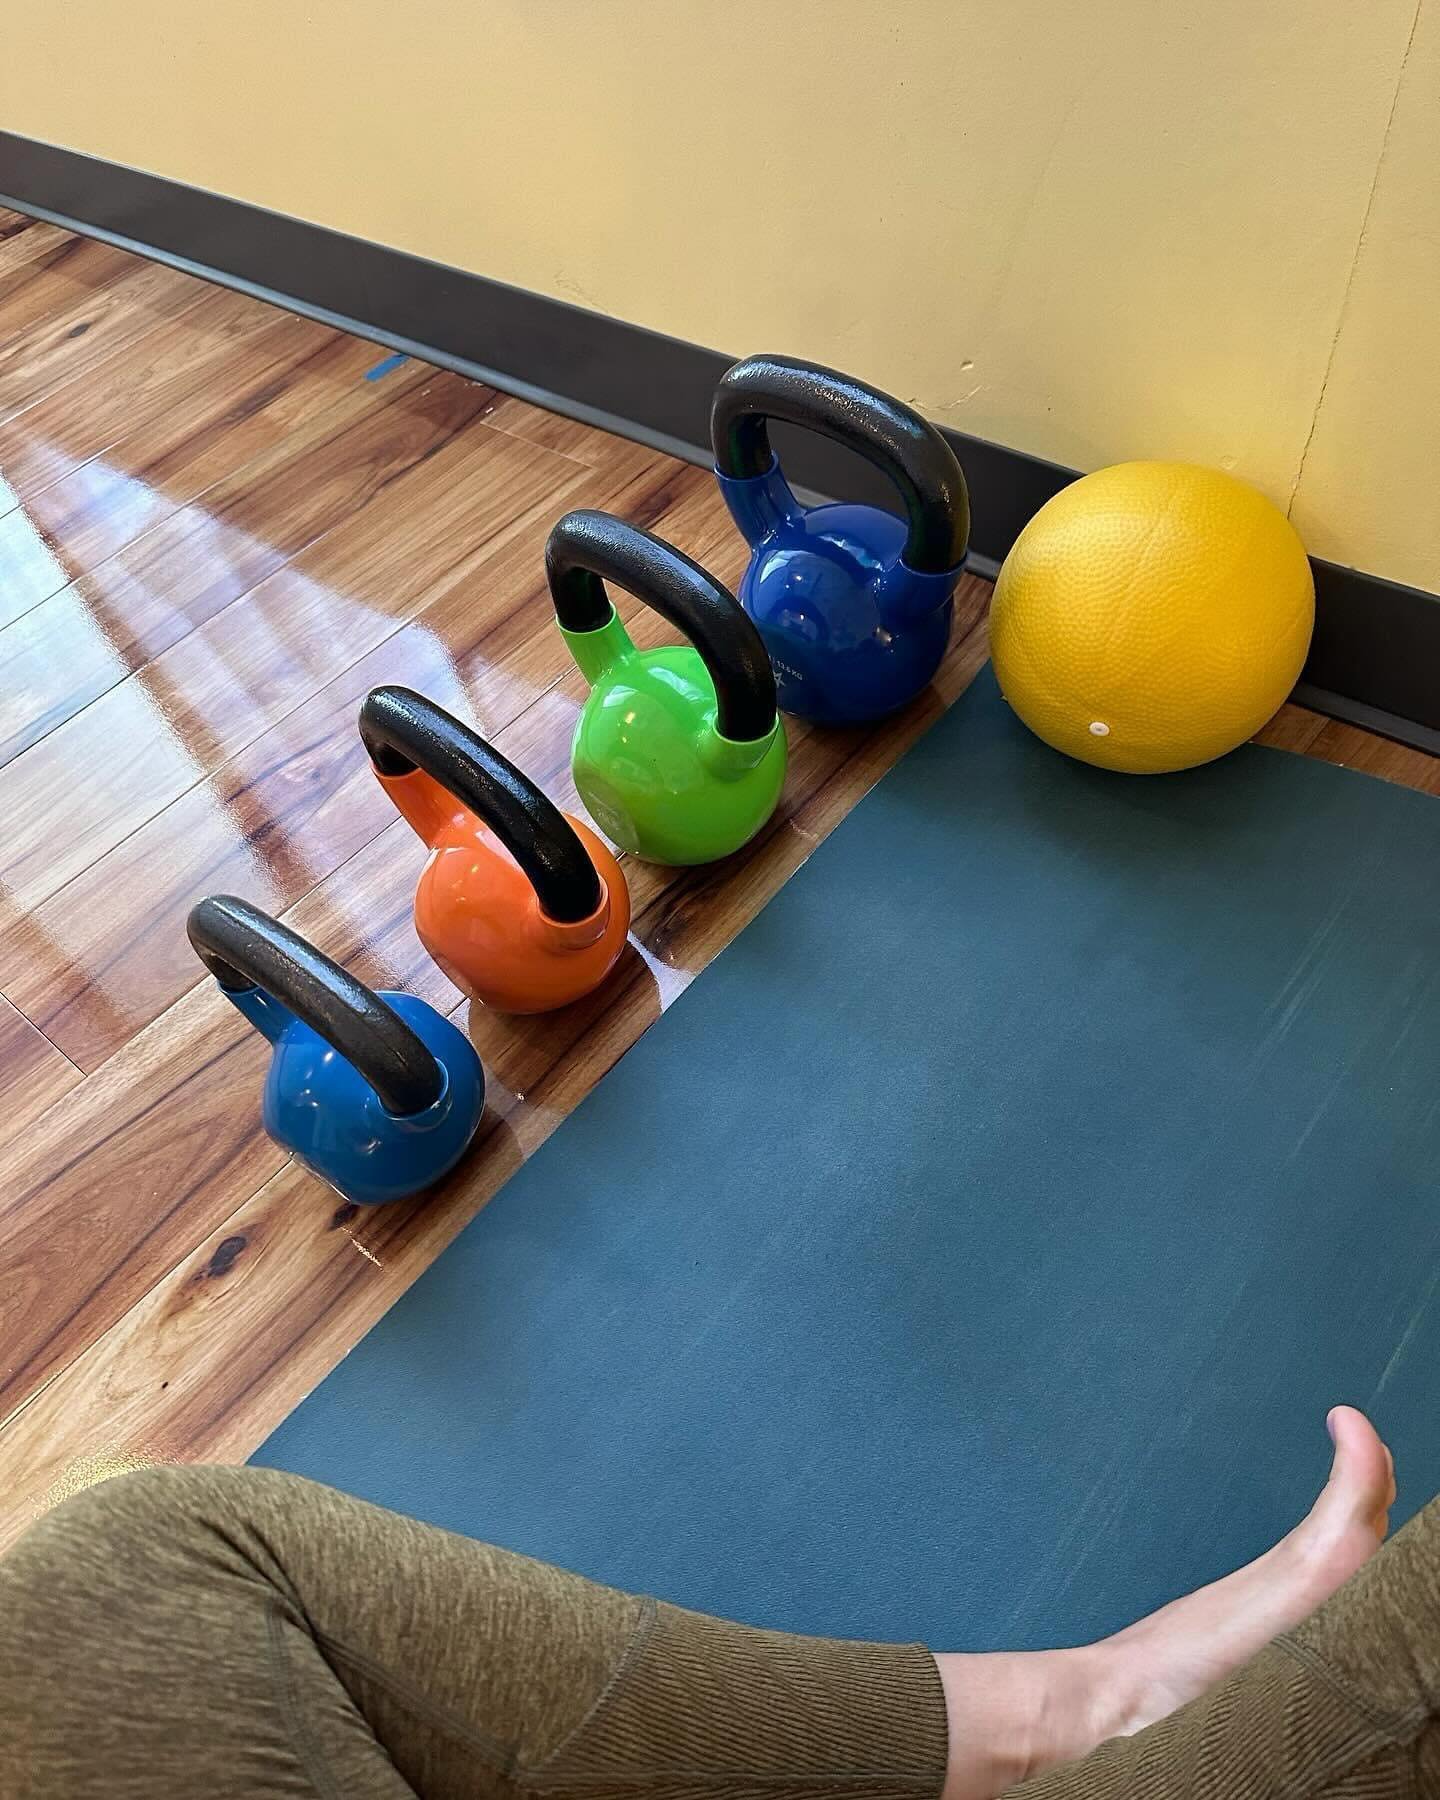 2 spots open in kettlebell tonight! Sign up asap to join us!
Thurs 5:45pm